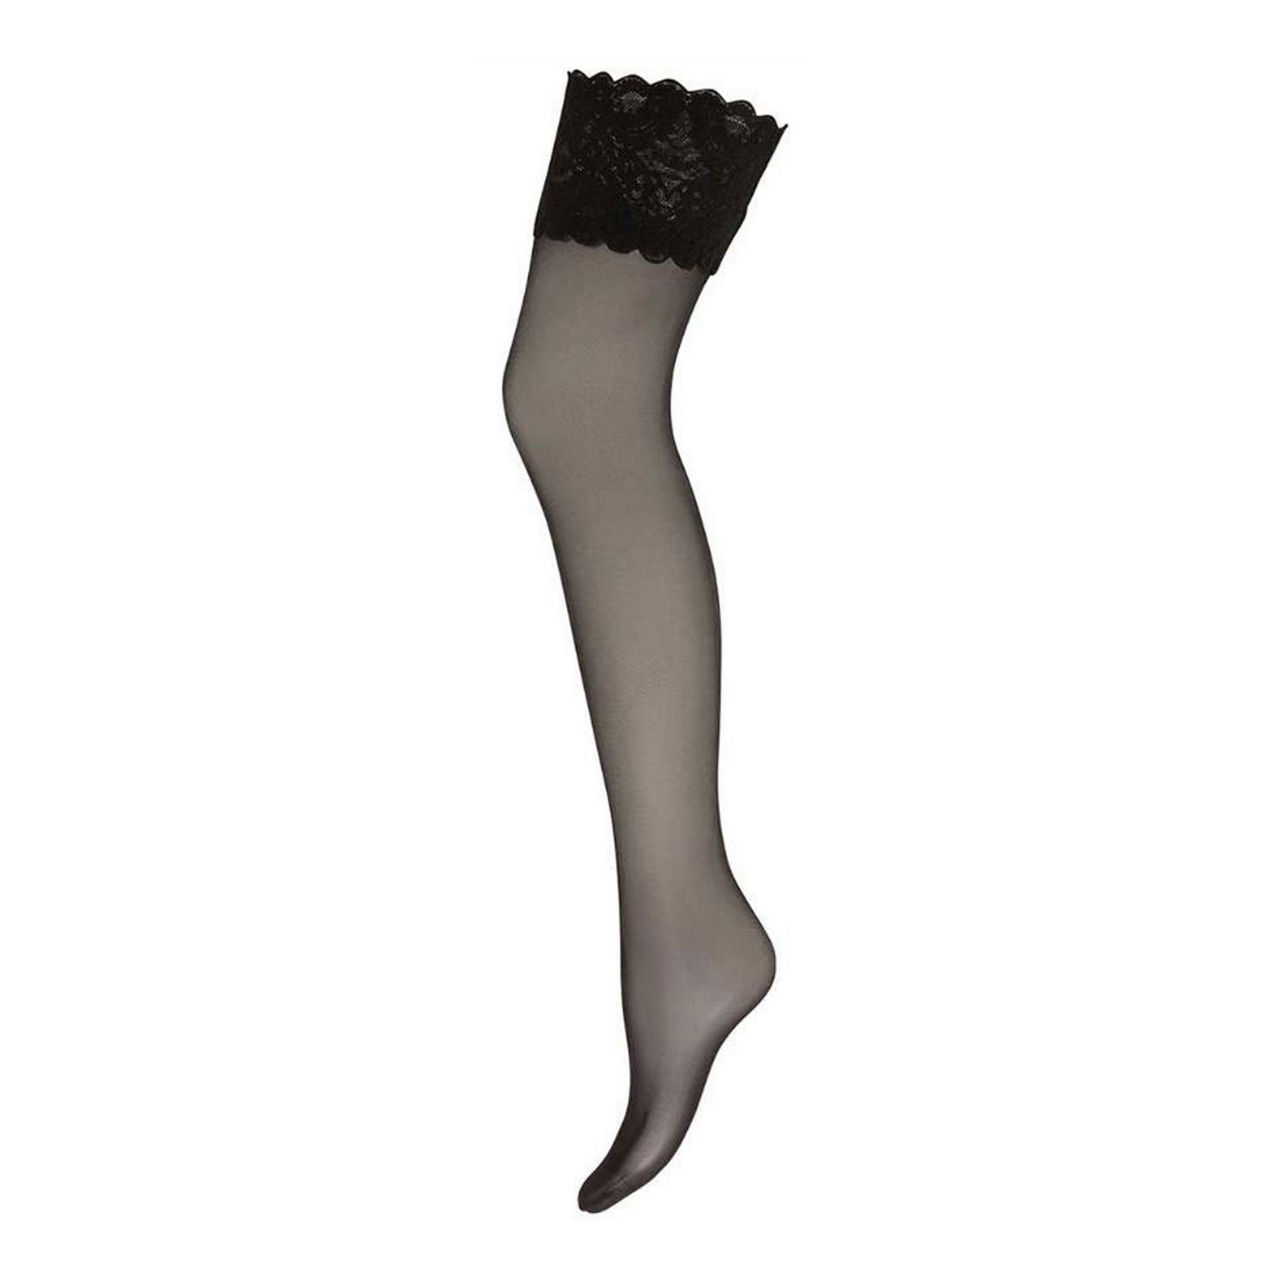 Wolford Satin Touch 20 Stay-Up Collants, 20 DEN, Noir (Nearly